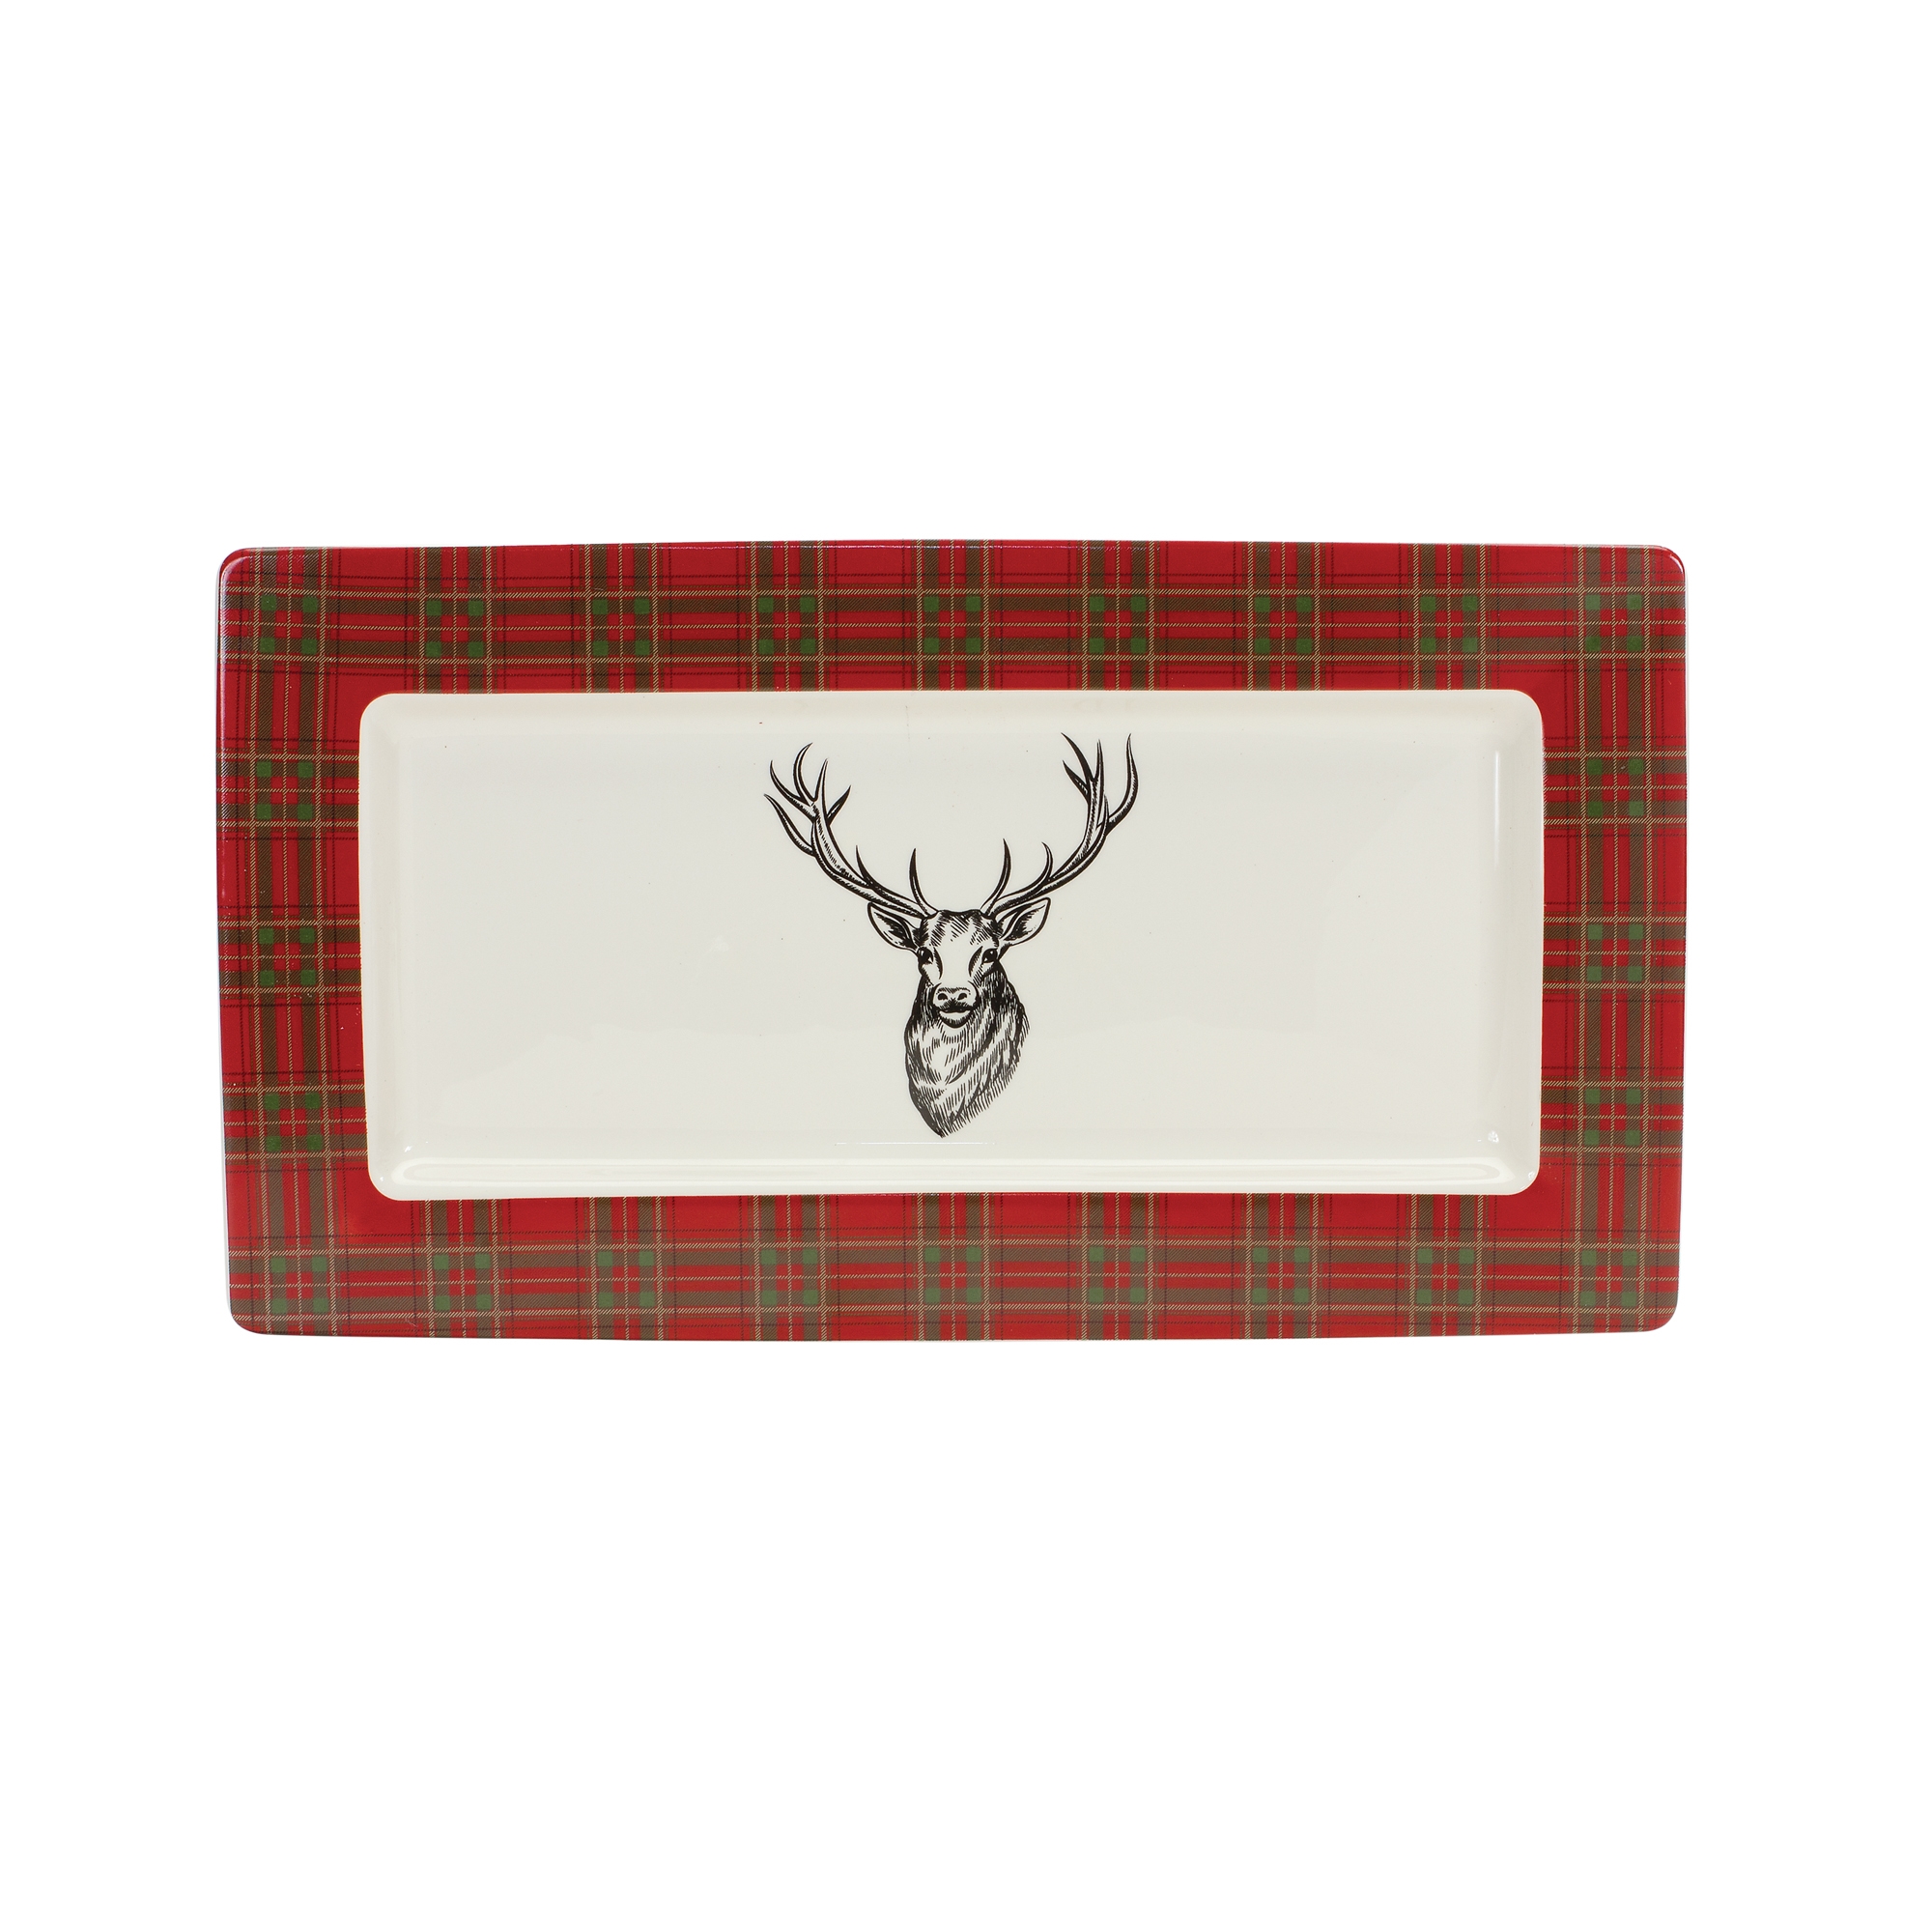 Melrose Set of 2 Red and White Plaid Reindeer Christmas Platters 13.75"